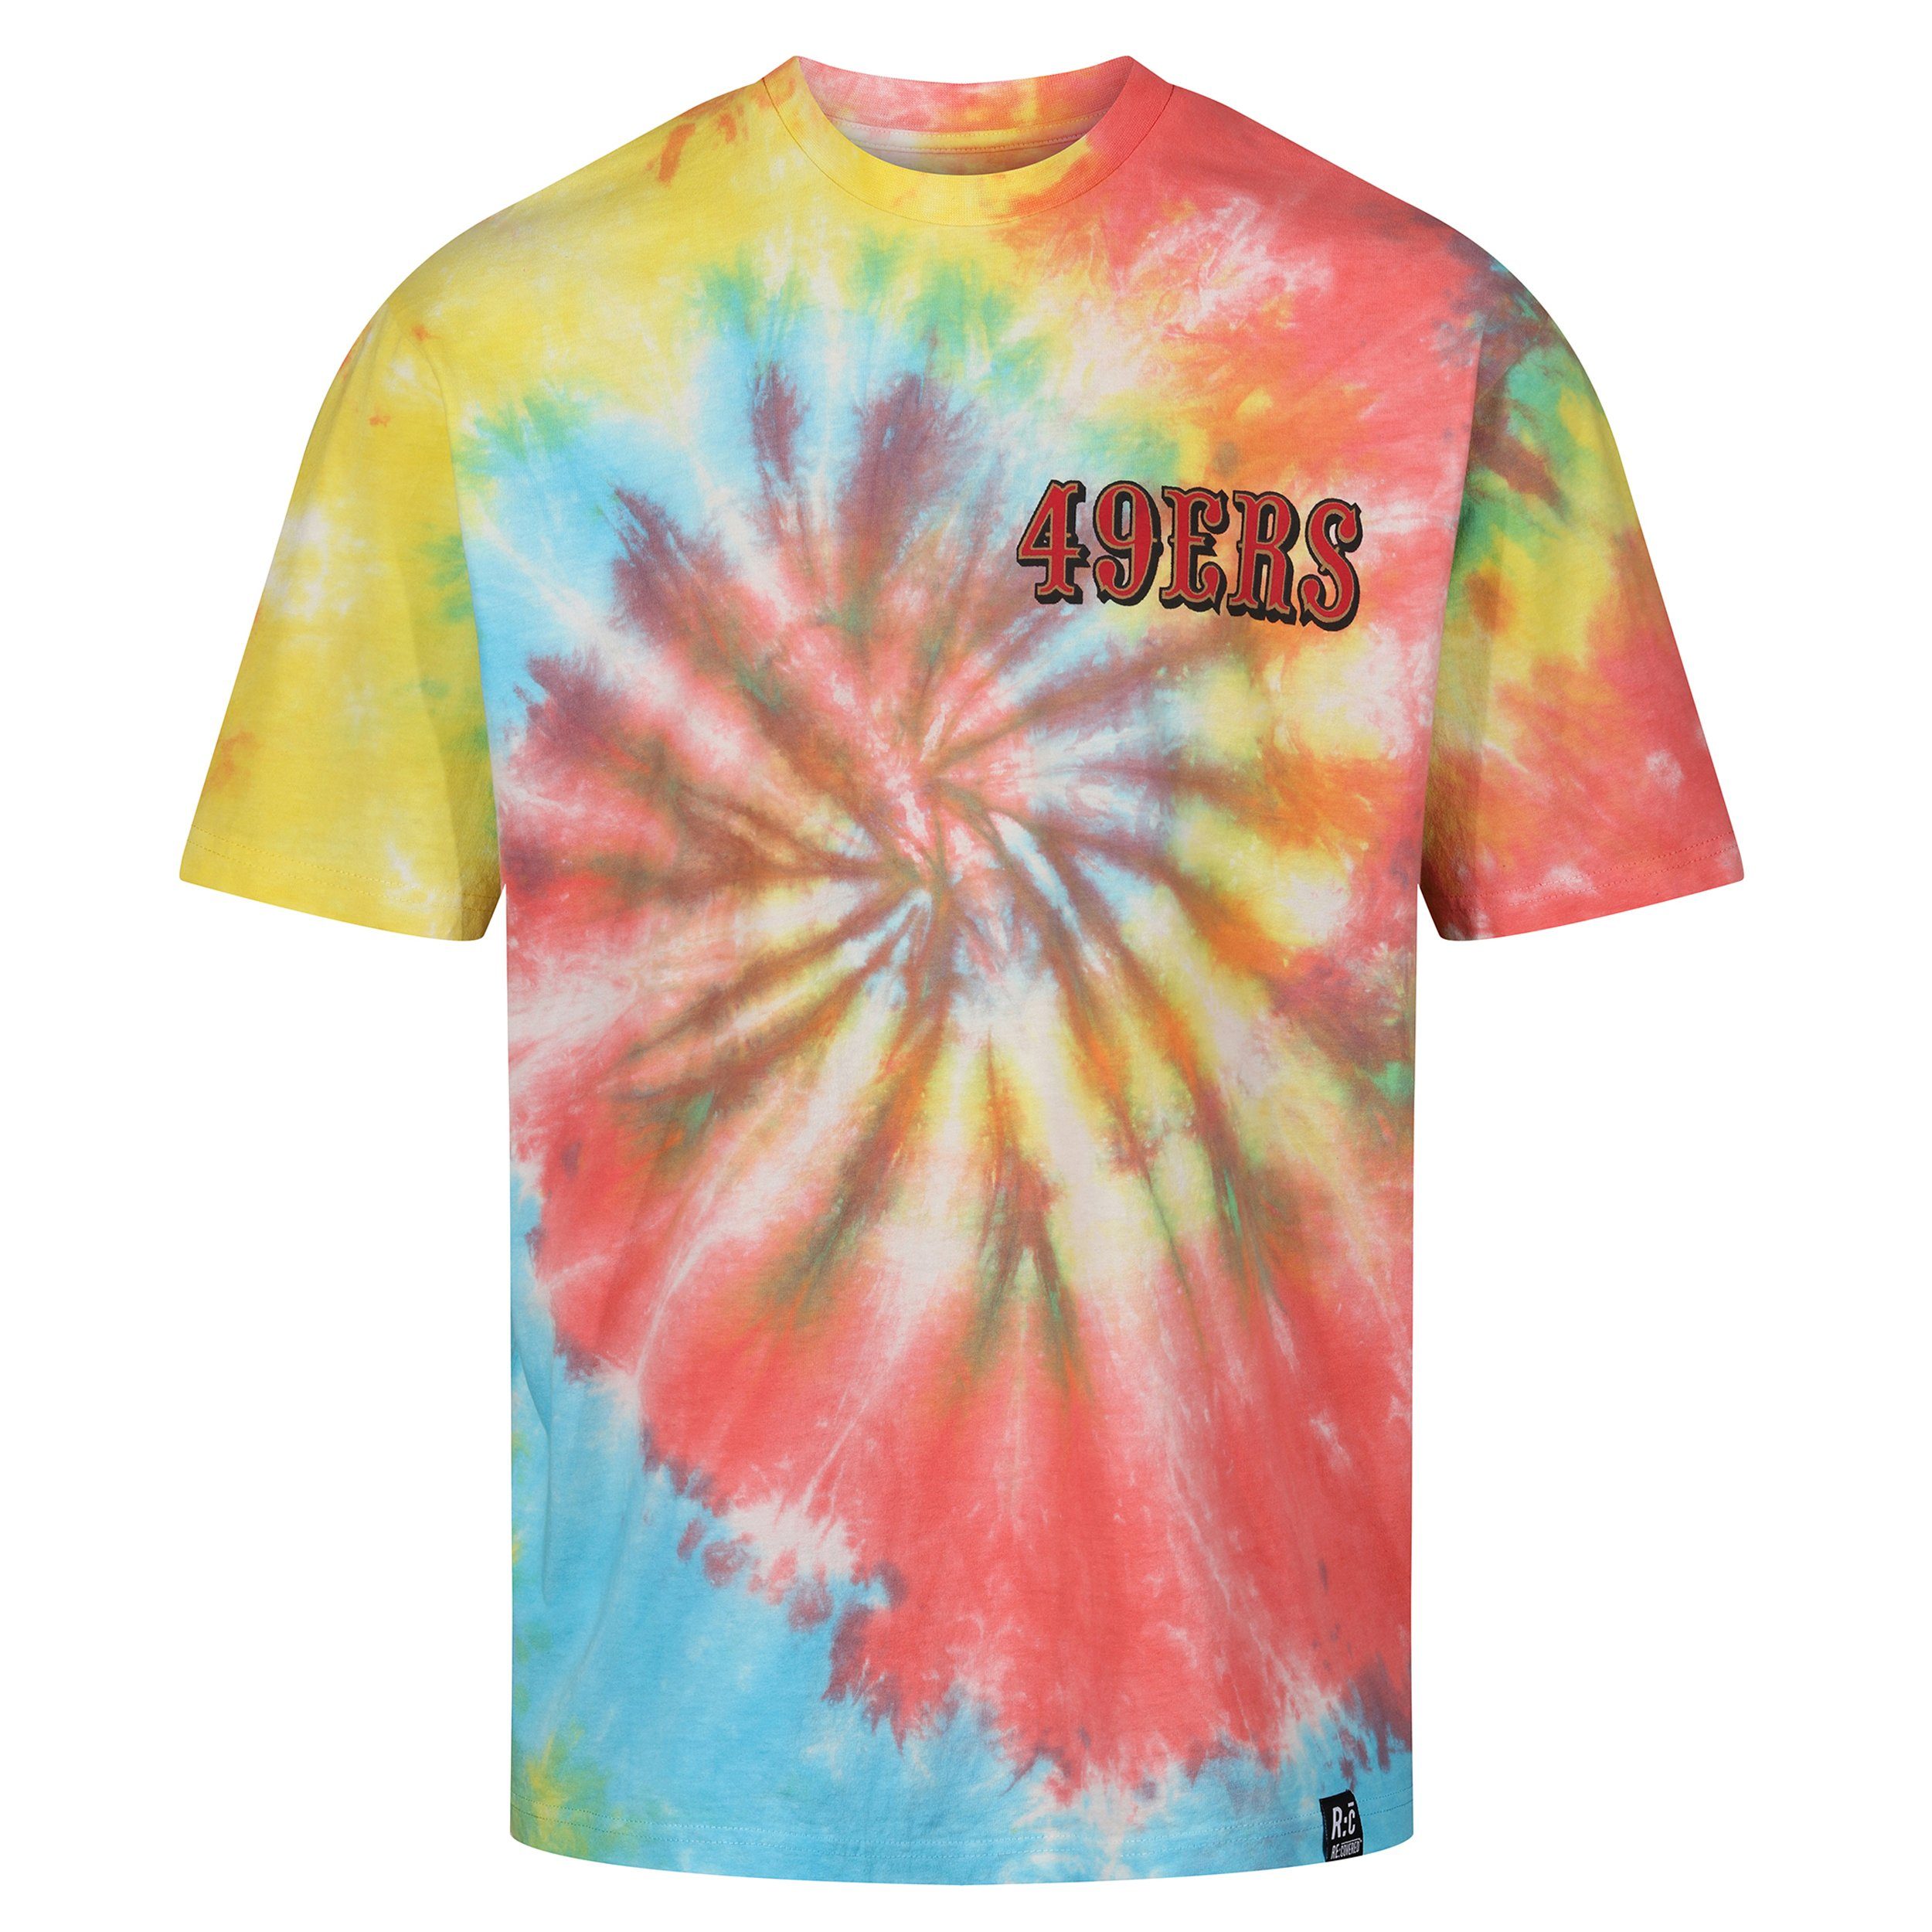 Recovered Print-Shirt San Francisco 49ers - NFL - Tie-Dye Relaxed T-Shirt, Rainbow